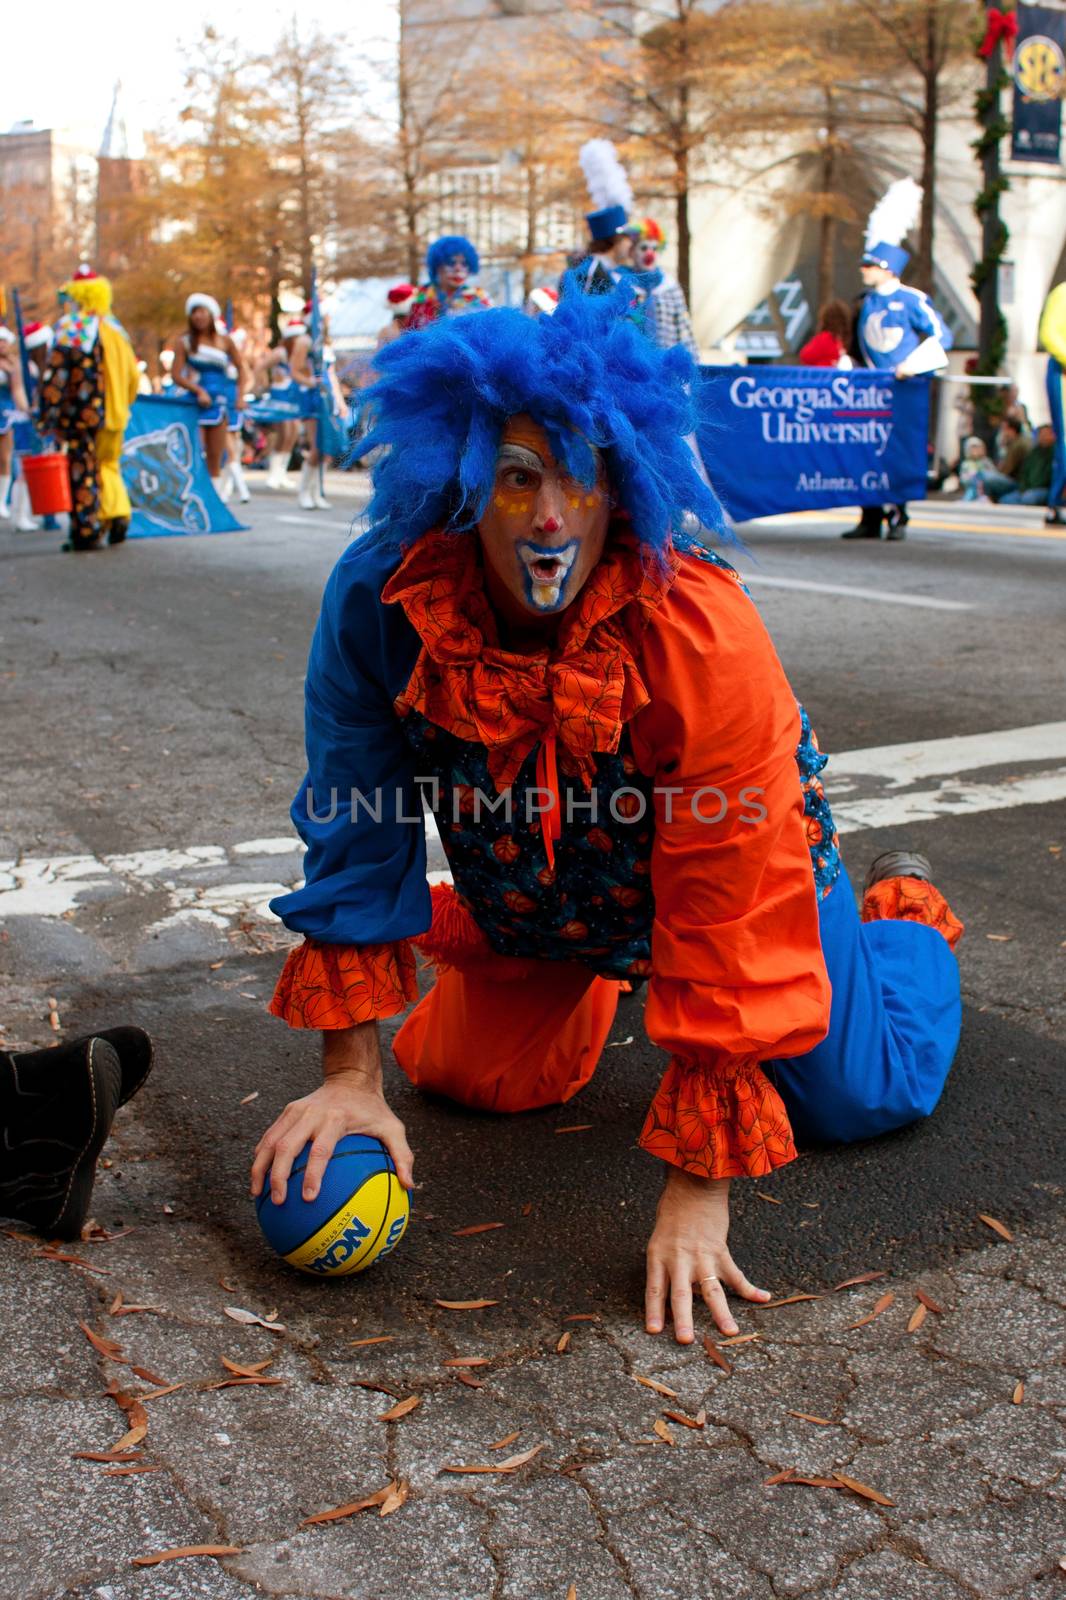 Atlanta, GA, USA - December 1, 2012:  A clown acts goofy as he performs for thousands of spectators attending the annual Atlanta Christmas parade in downtown Atlanta.